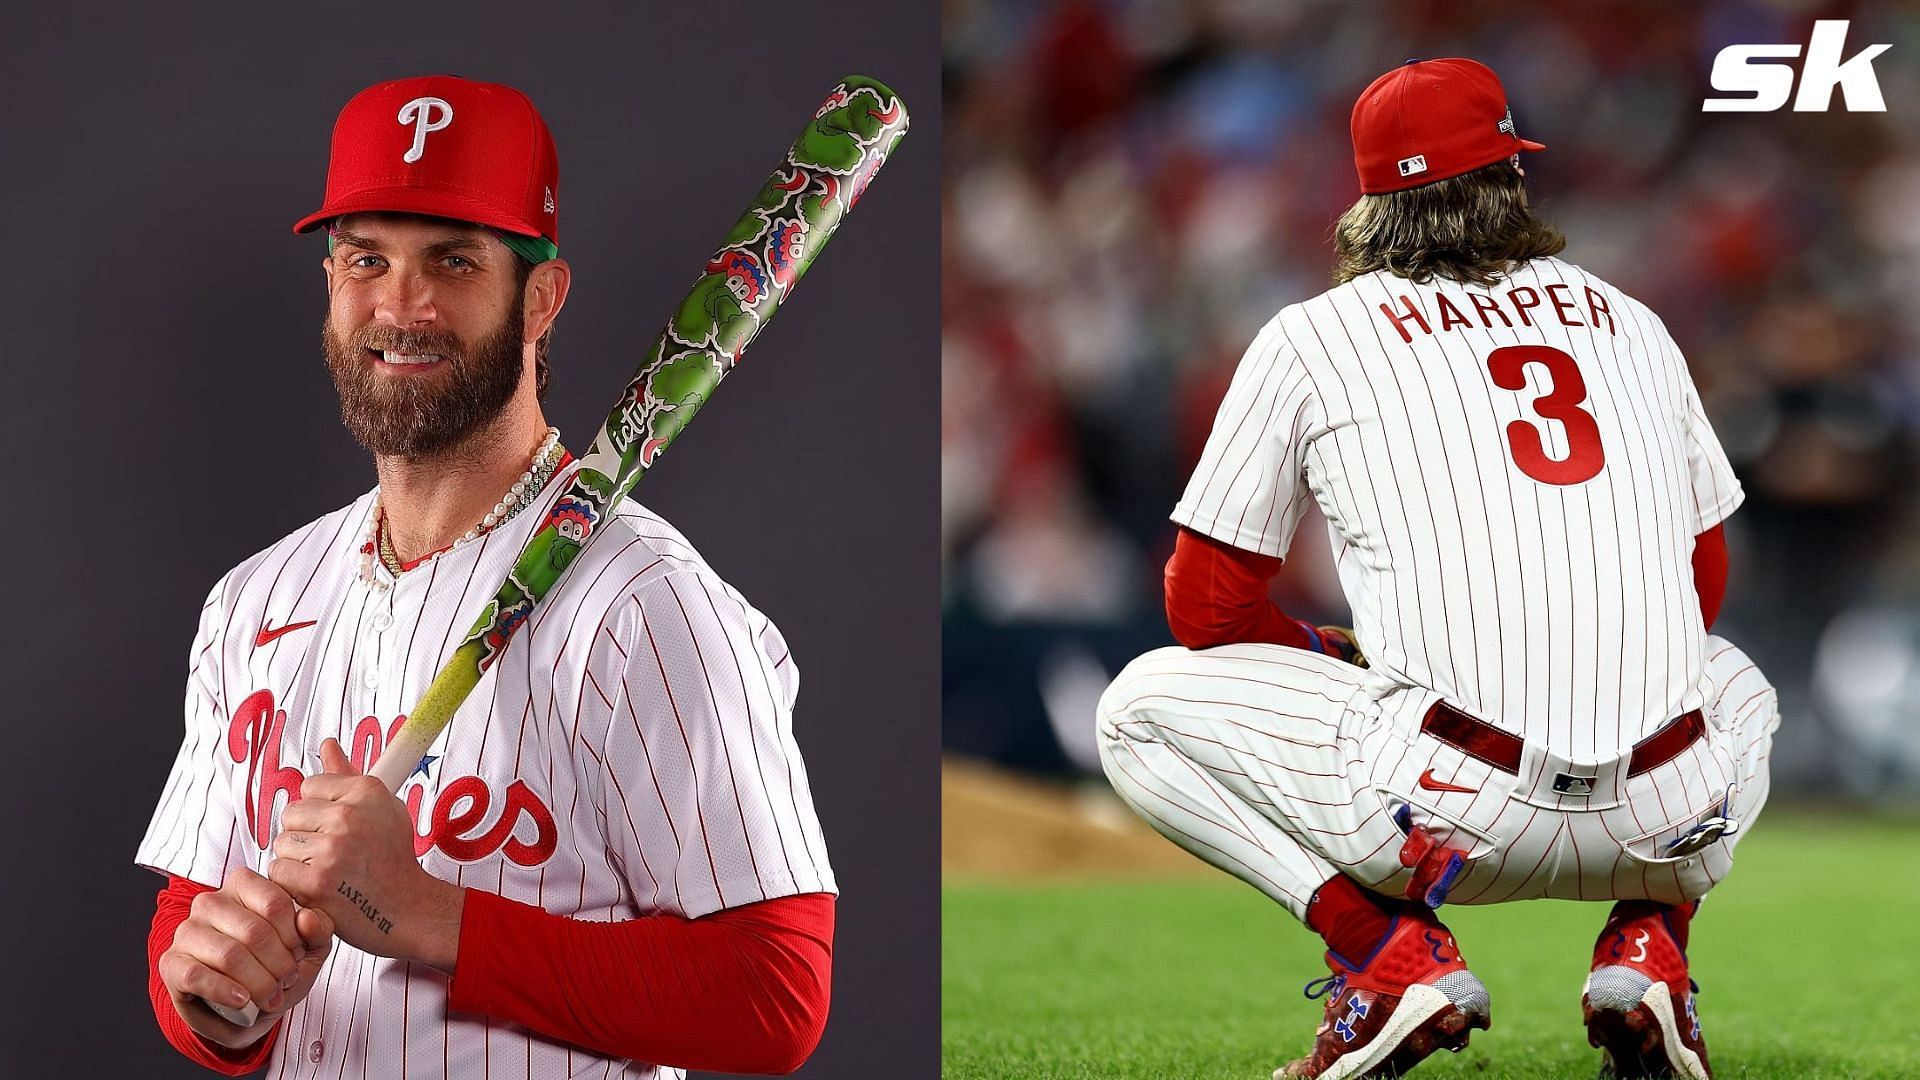 Phillies superstar Bryce Harper launched first home run of the season against the Reds